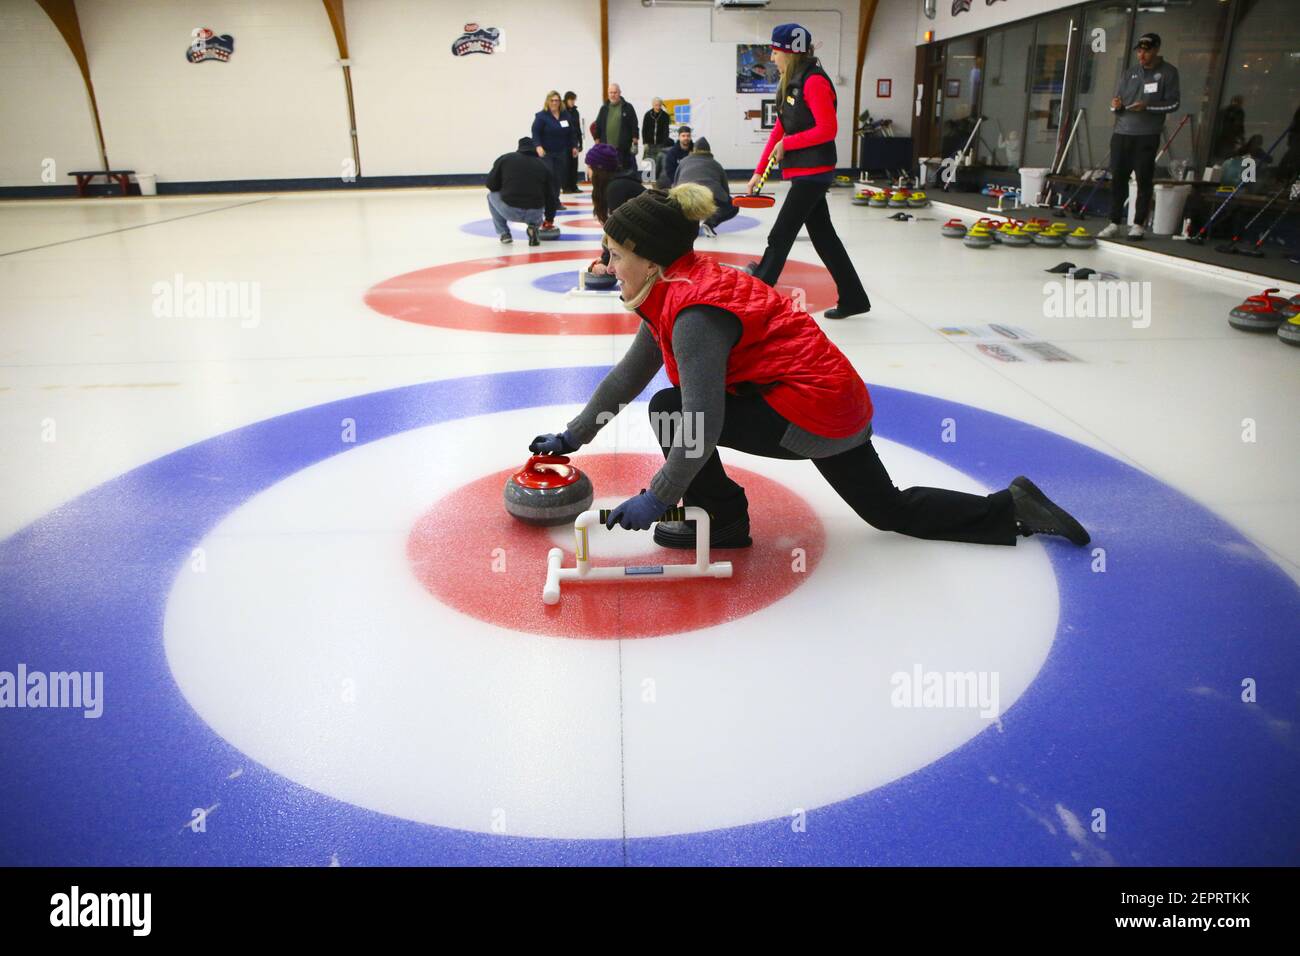 Betsy Barnett launches a granite curling rock during a Learn2Curl class at the Chicago Curling Club on January 10, 2018, in Northbrook, Ill. The Club is celebrating its 70th year. (Photo by Stacey Wescott/Chicago Tribune/TNS/Sipa USA) Stock Photo